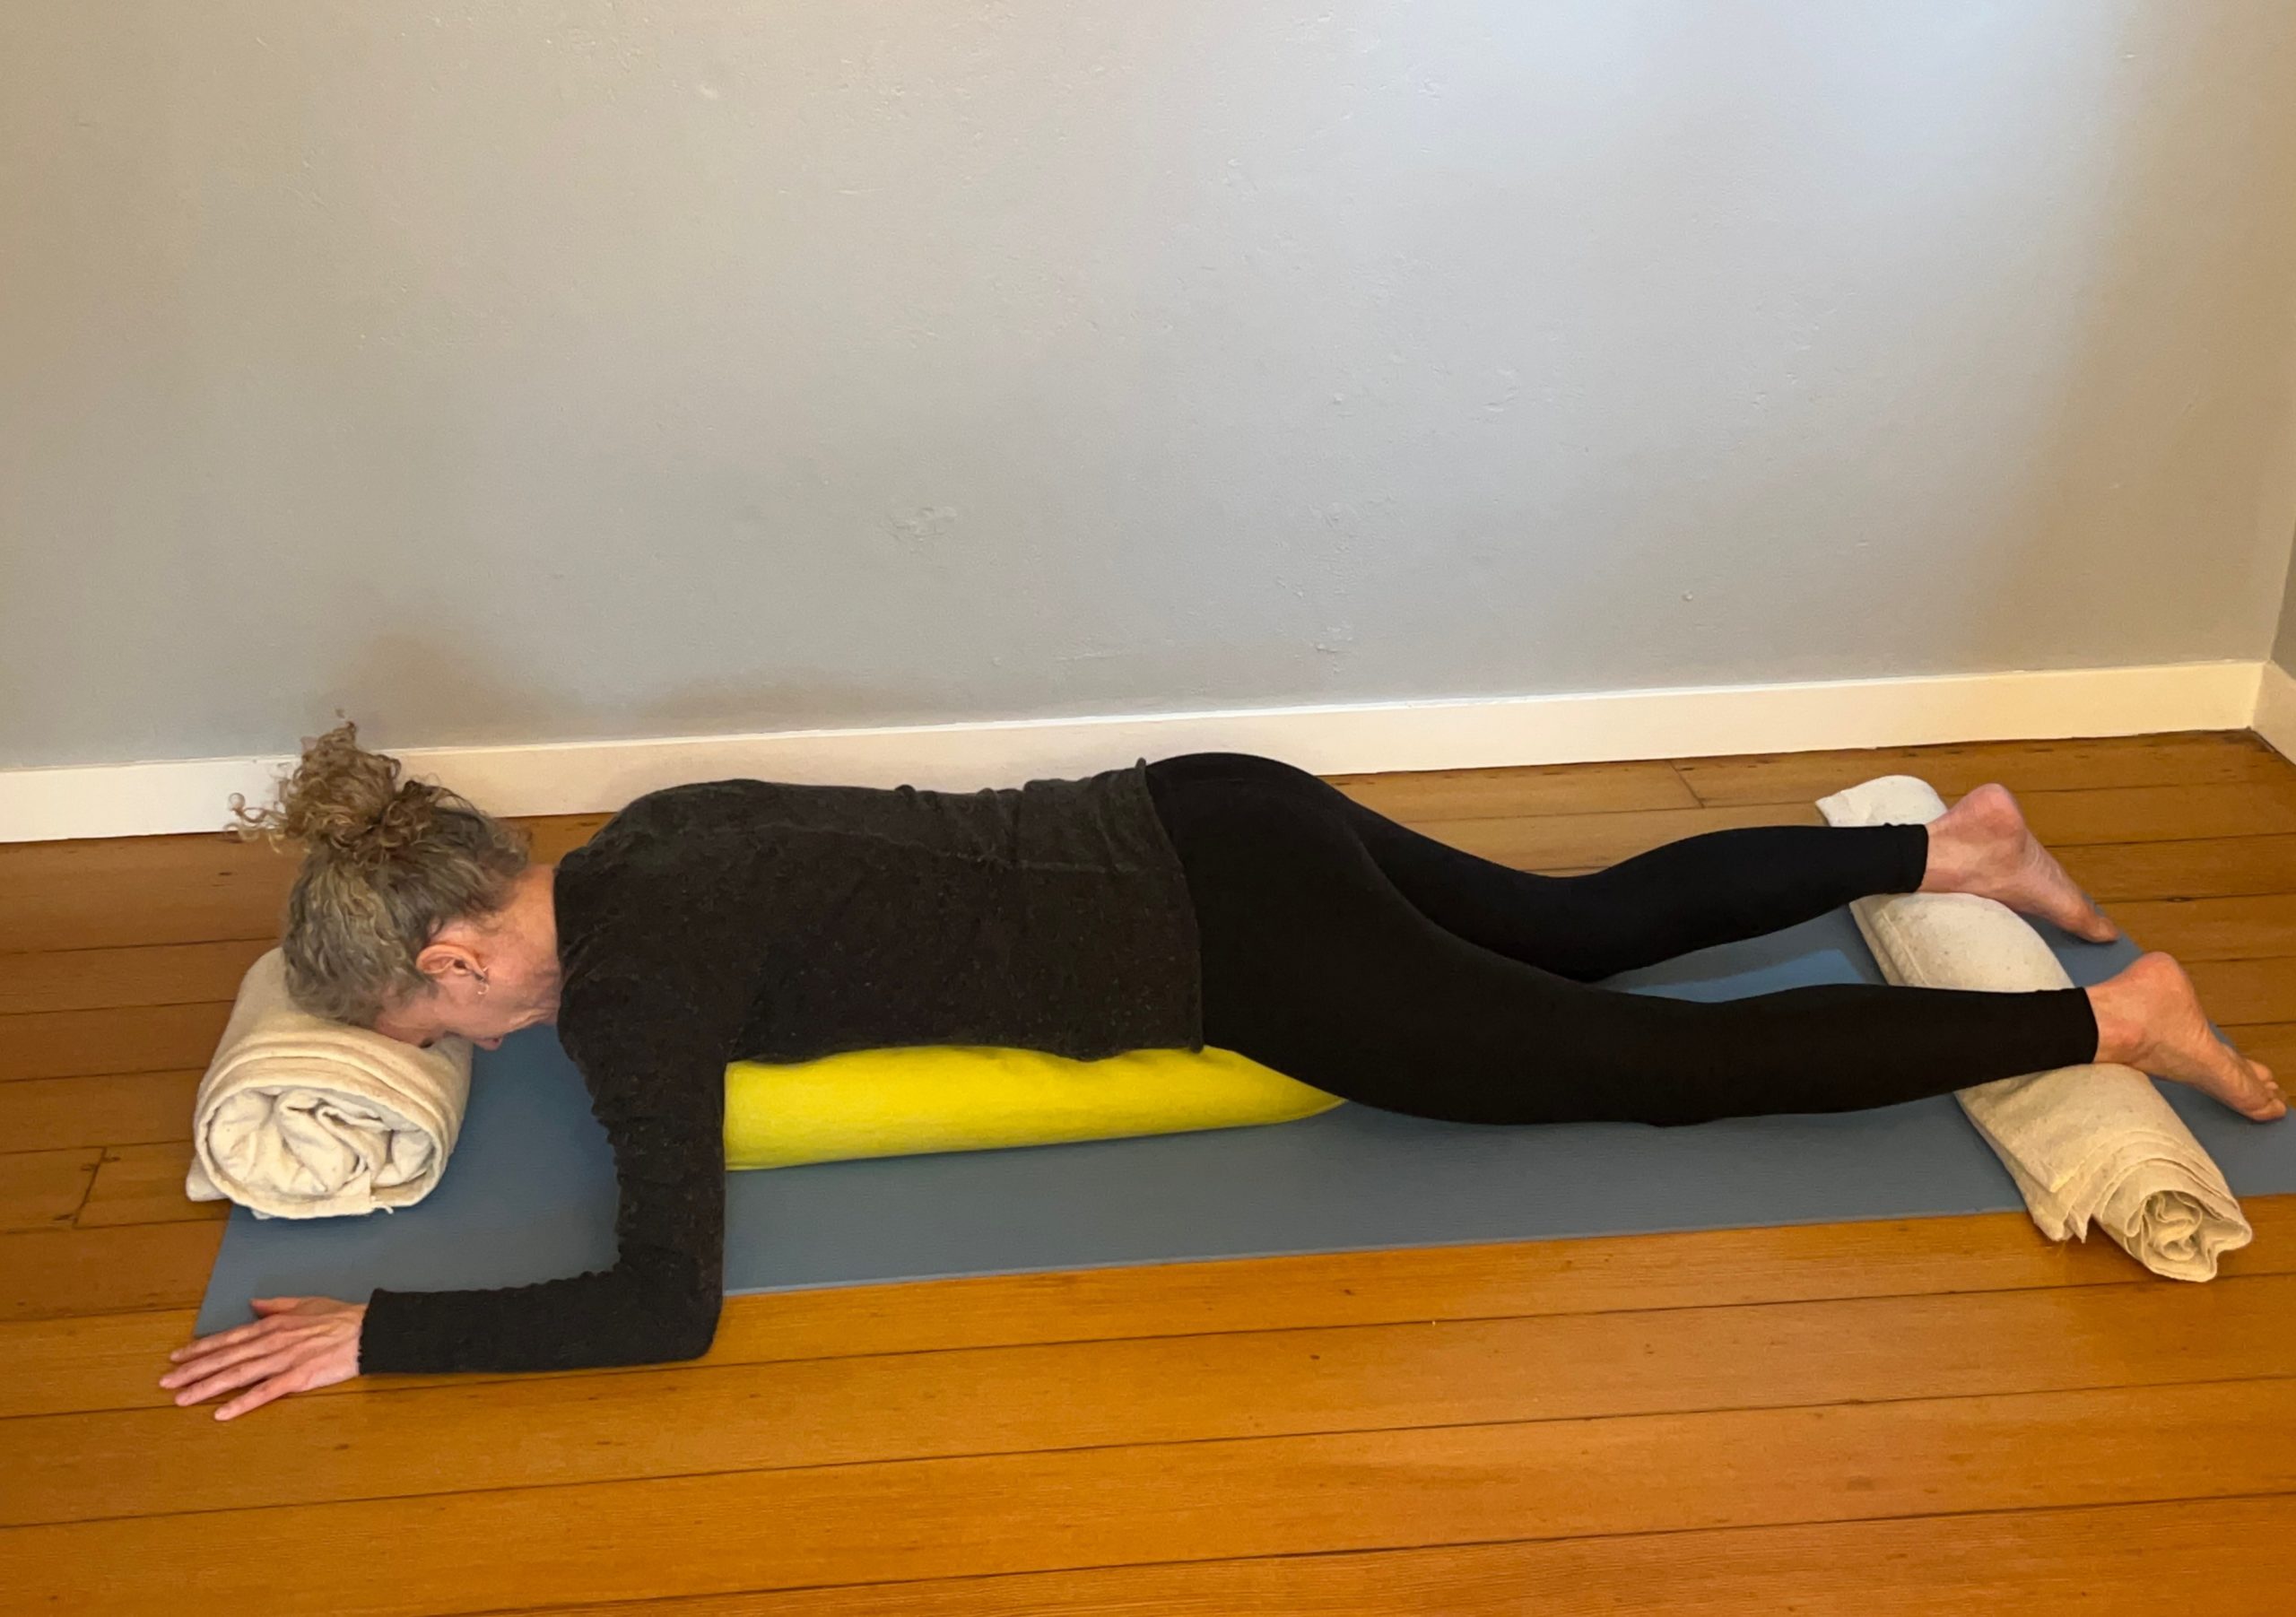 Sri Sri Prema - The corpse pose or Shavasana is a wonderful yogasana, as  anyone can do this and reap incredible benefits. A few minutes of your busy  schedule is all it